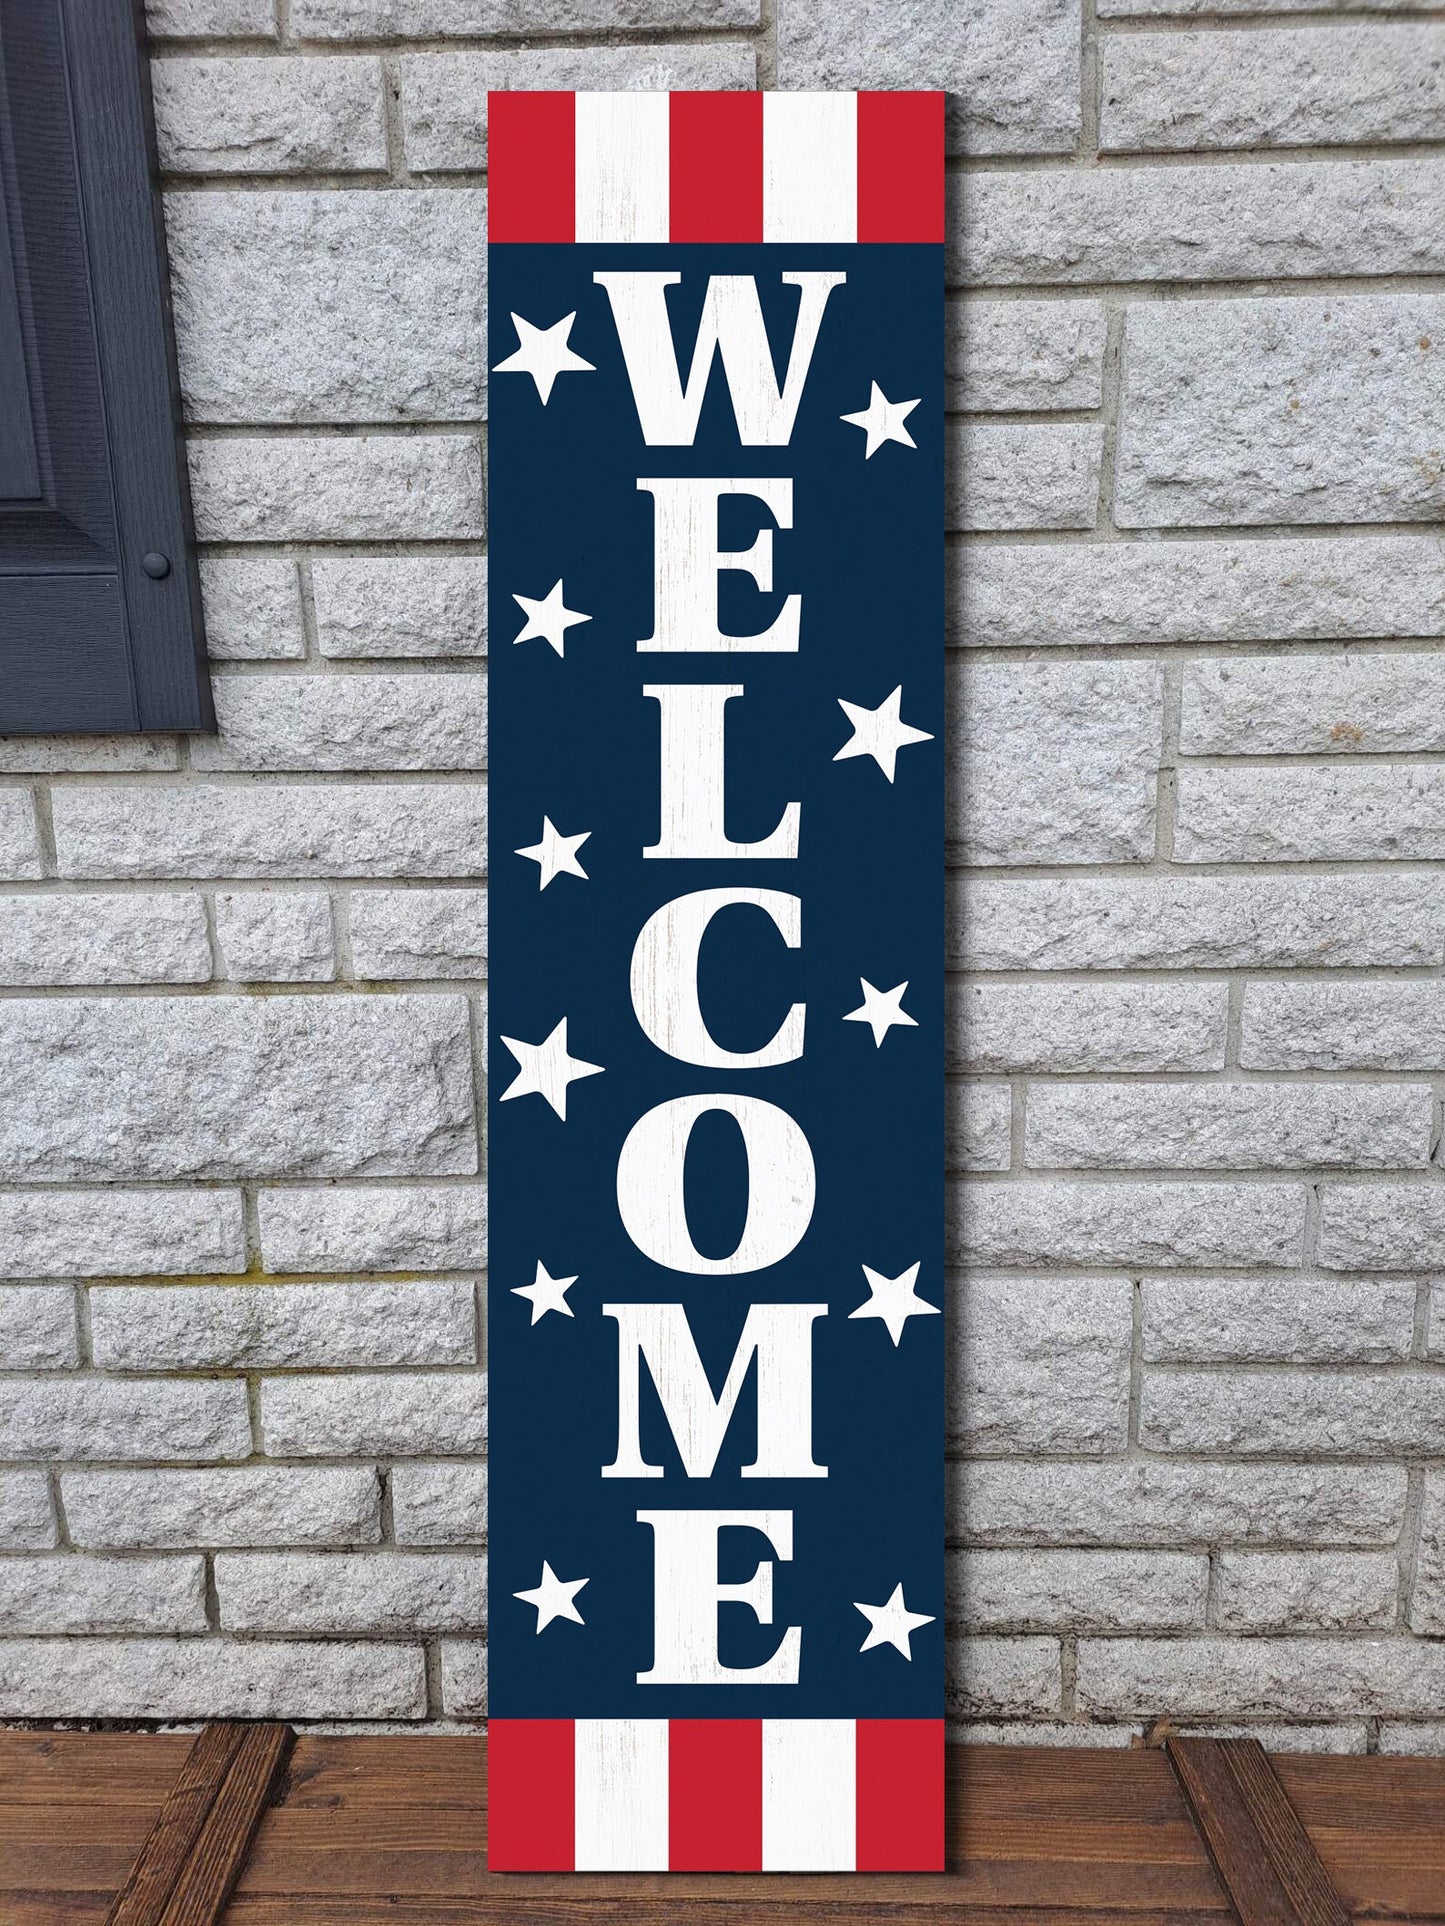 36in "Welcome" 4th of July Porch Sign - Vibrant & Patriotic Front Door Decor for Independence Day Festivities